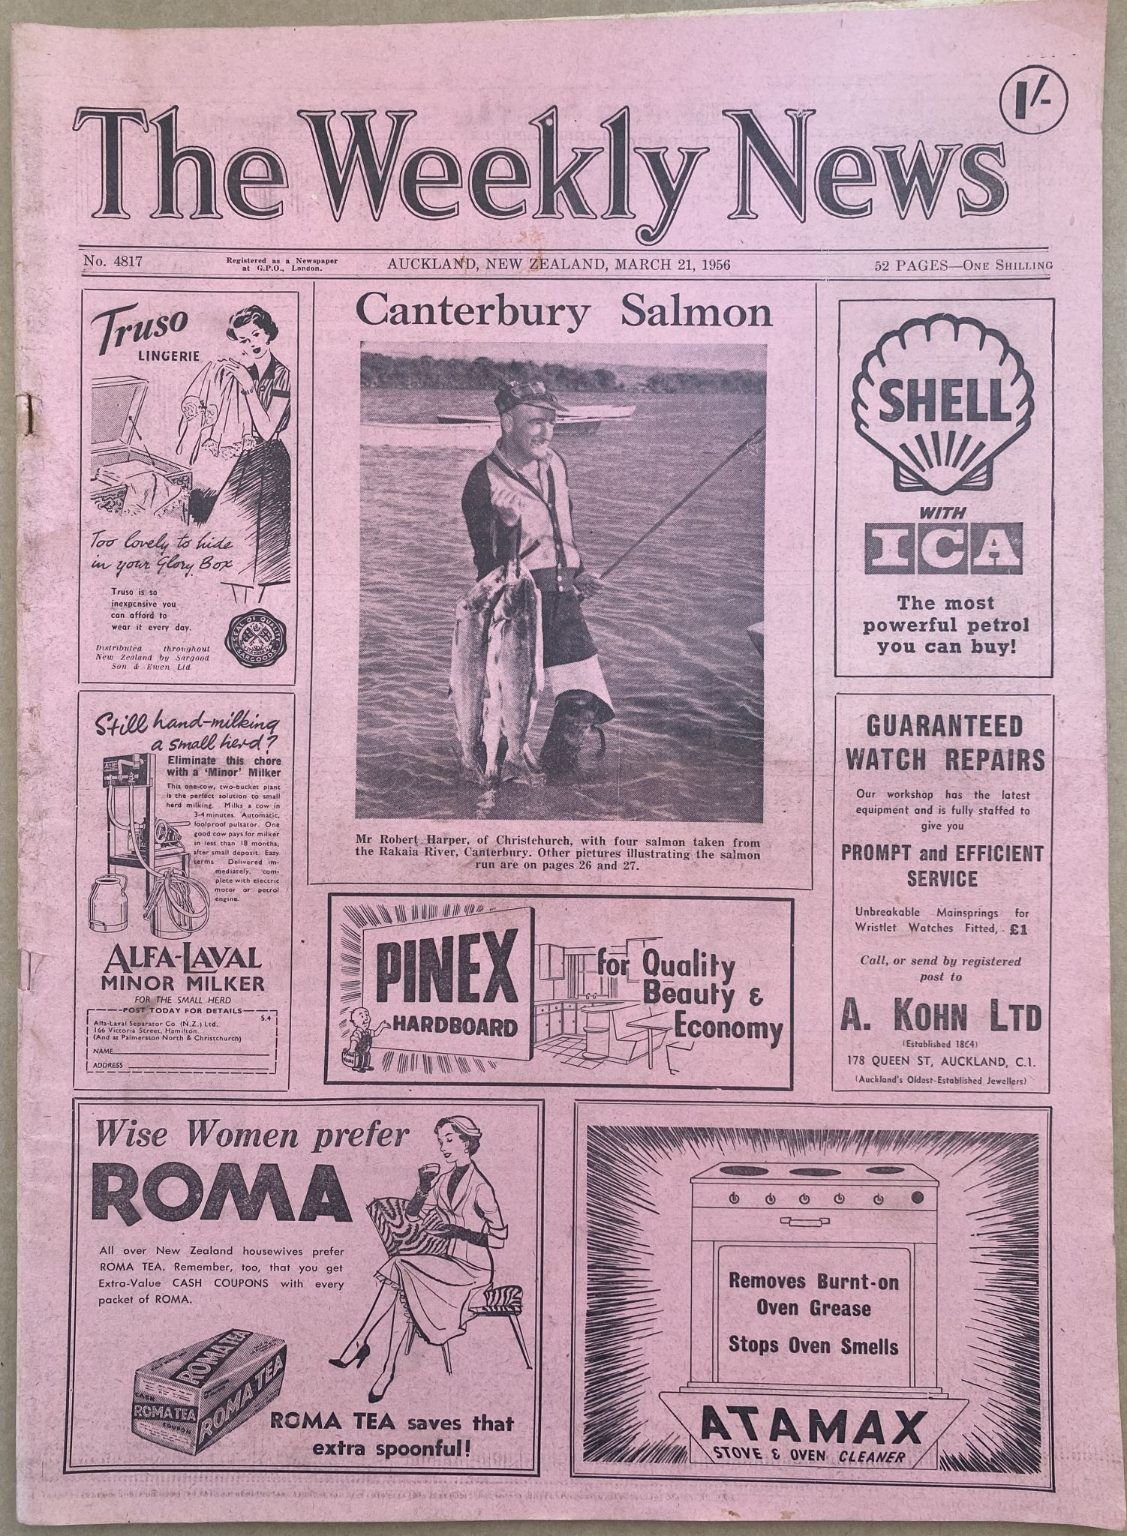 OLD NEWSPAPER: The Weekly News - No. 4817, 21 March 1956